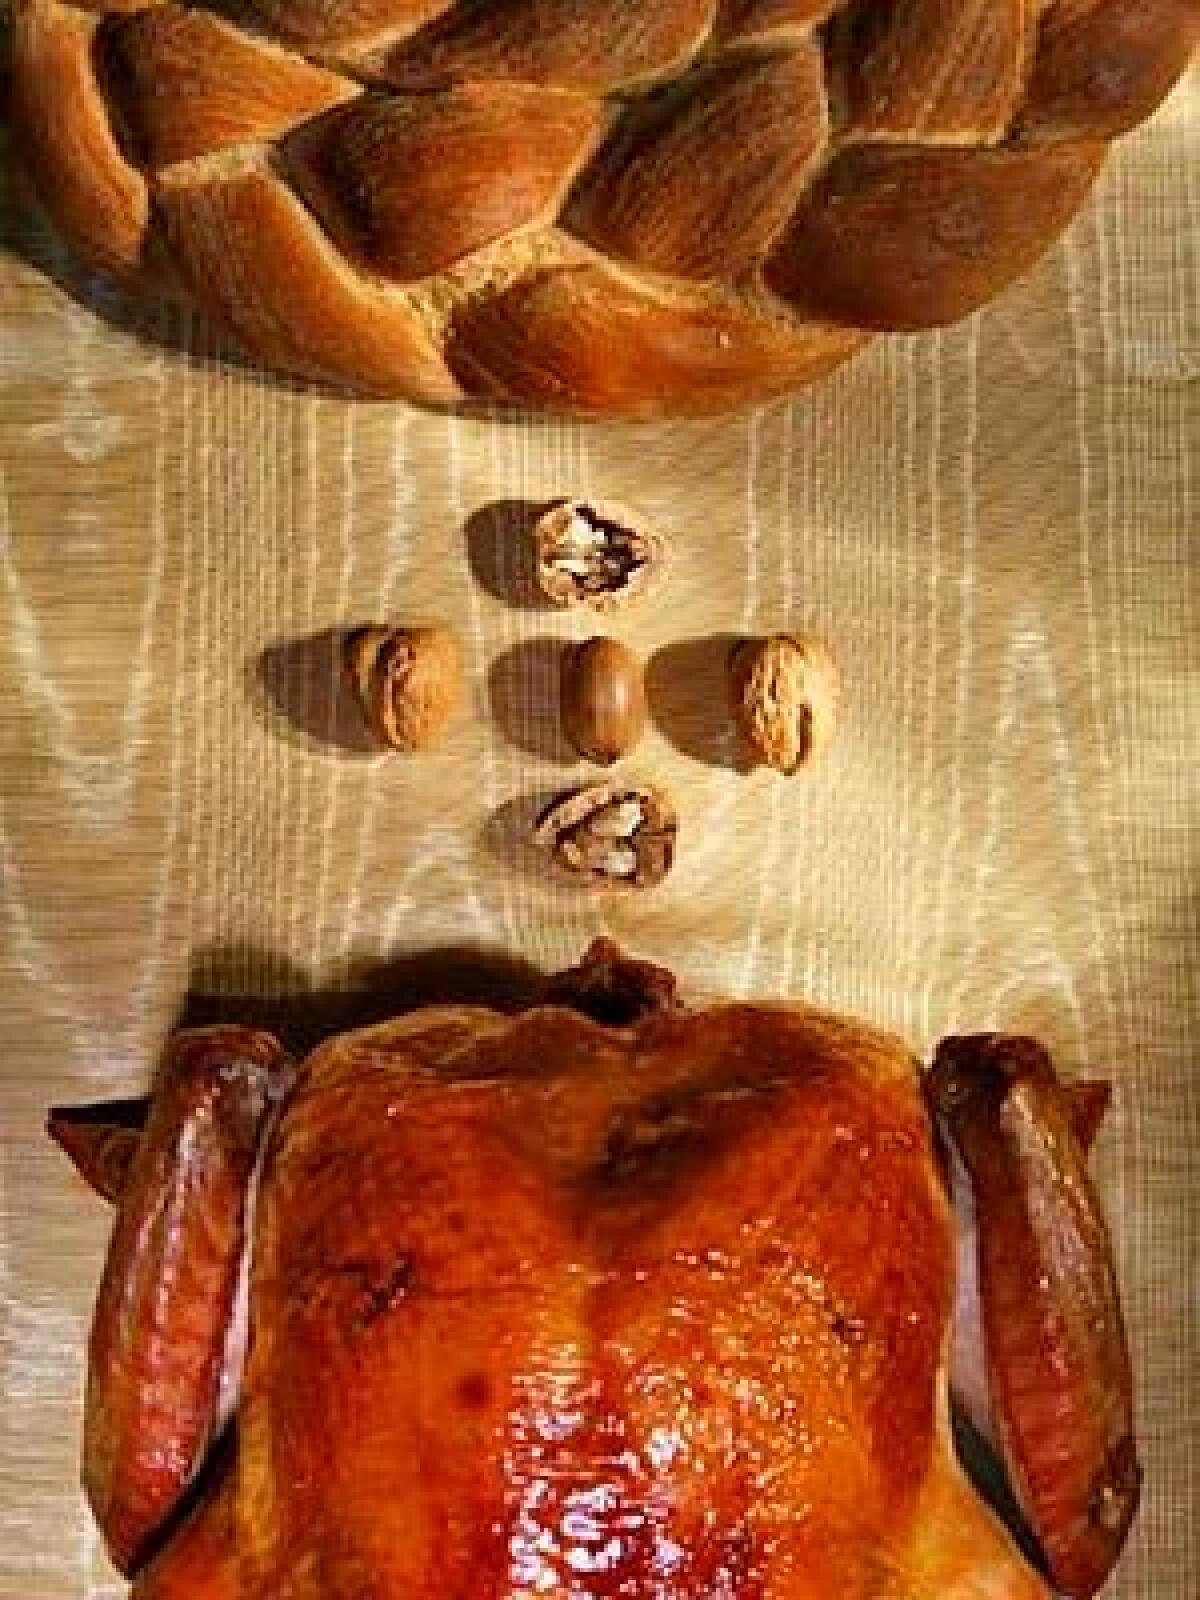 A glistening turkey with crisp, bronzed skin is the centerpiece of the feast; the wheat-brown wreath of braided breads  one seasoned with rosemary, the other spiked with pepper  surprises and delights.